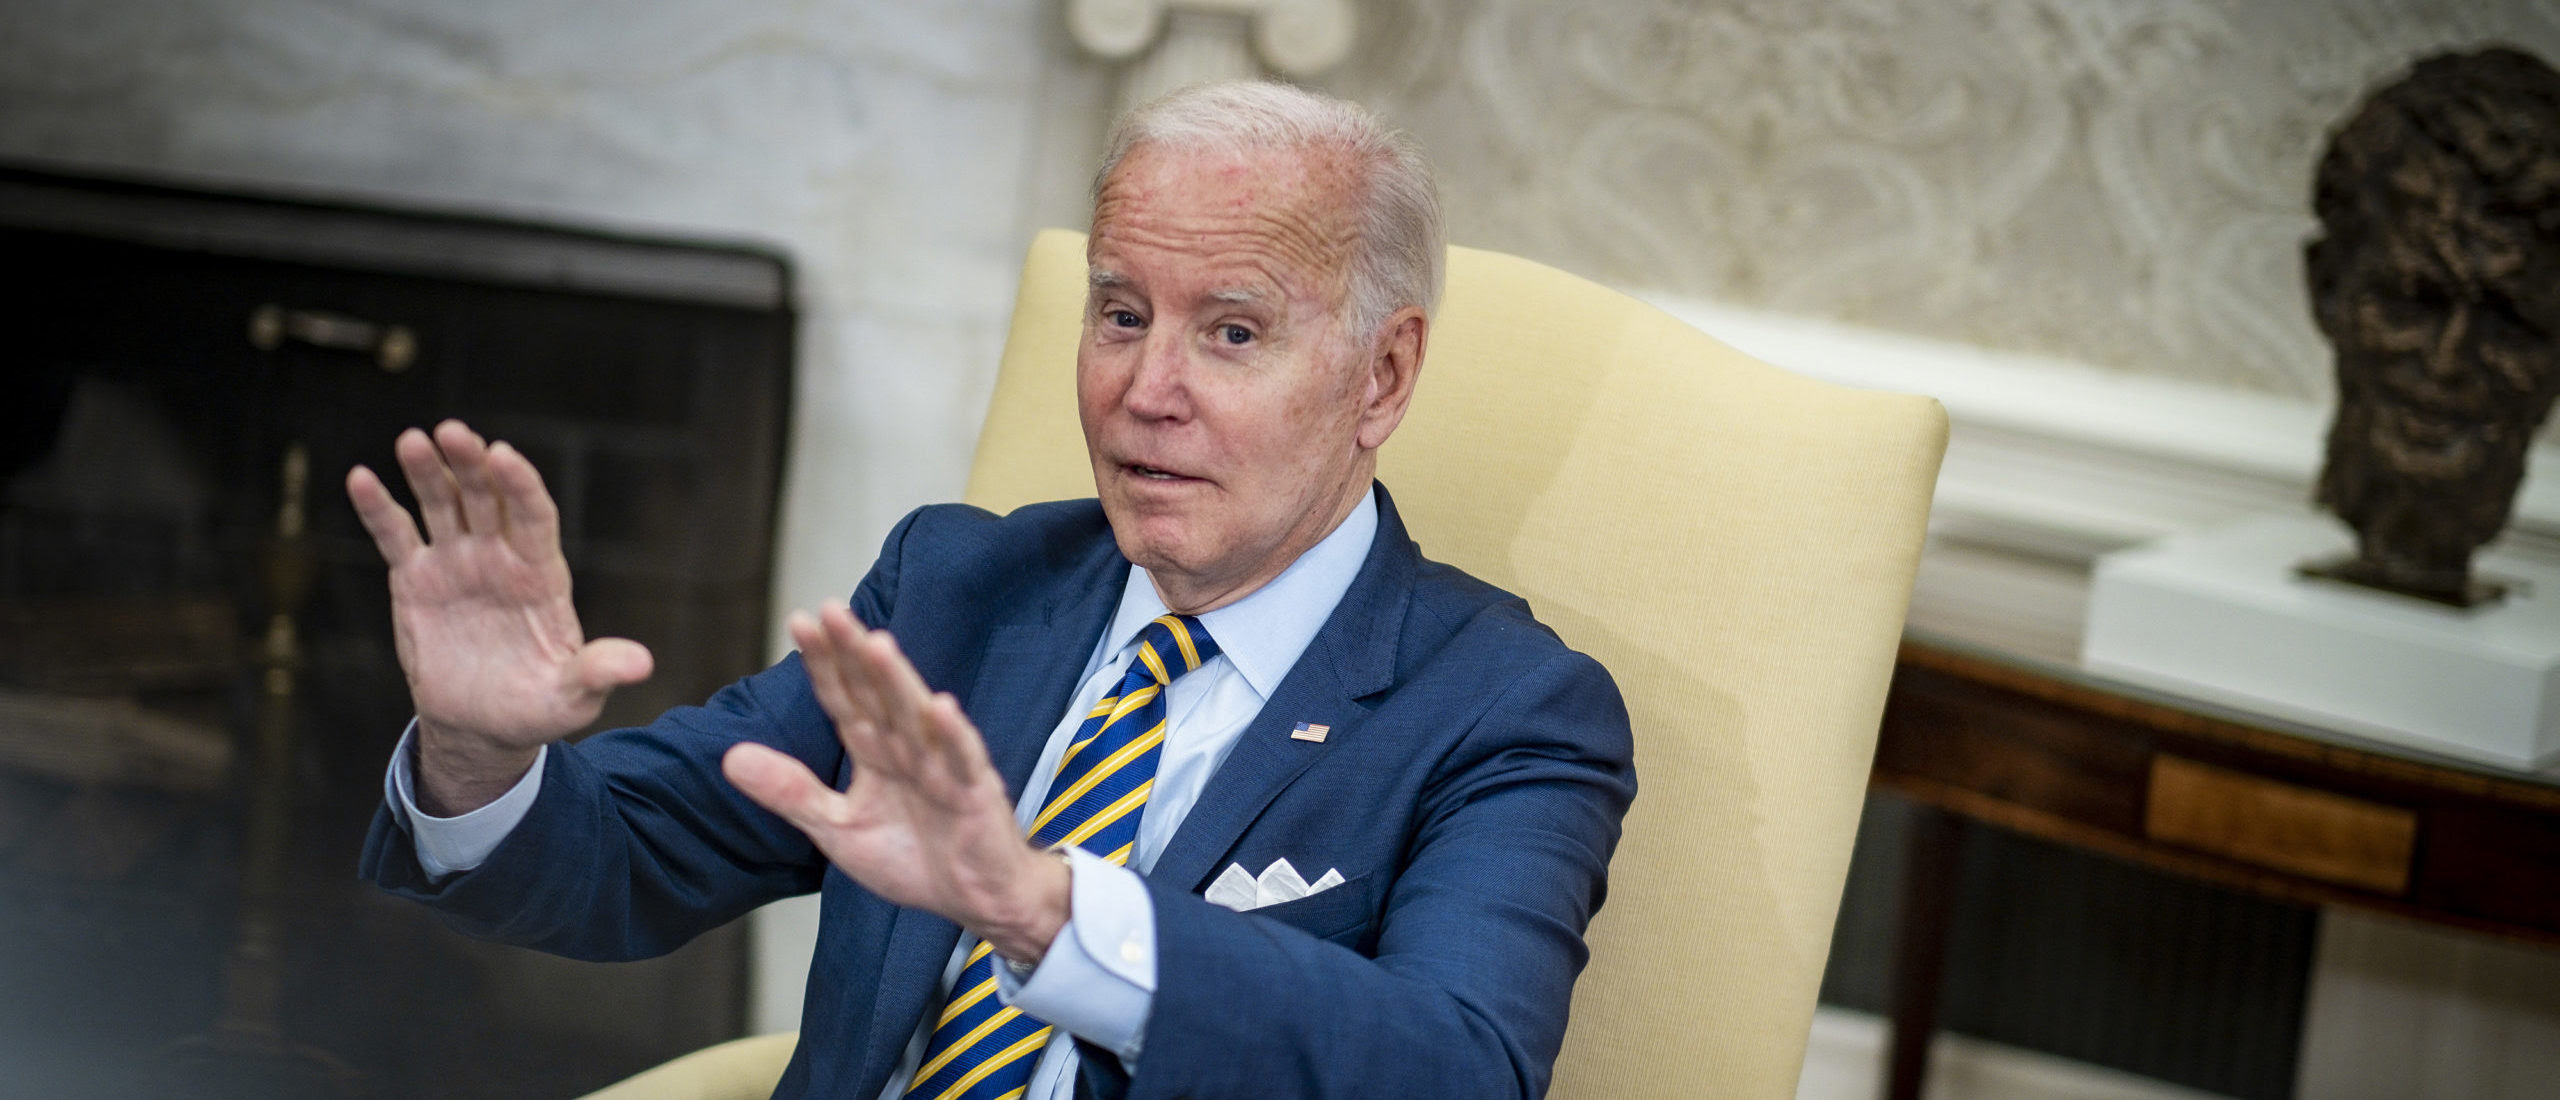 Biden Approval Rating Sinks Below 40%, Signaling Potential Reversal Of A Political ‘Comeback’: POLL